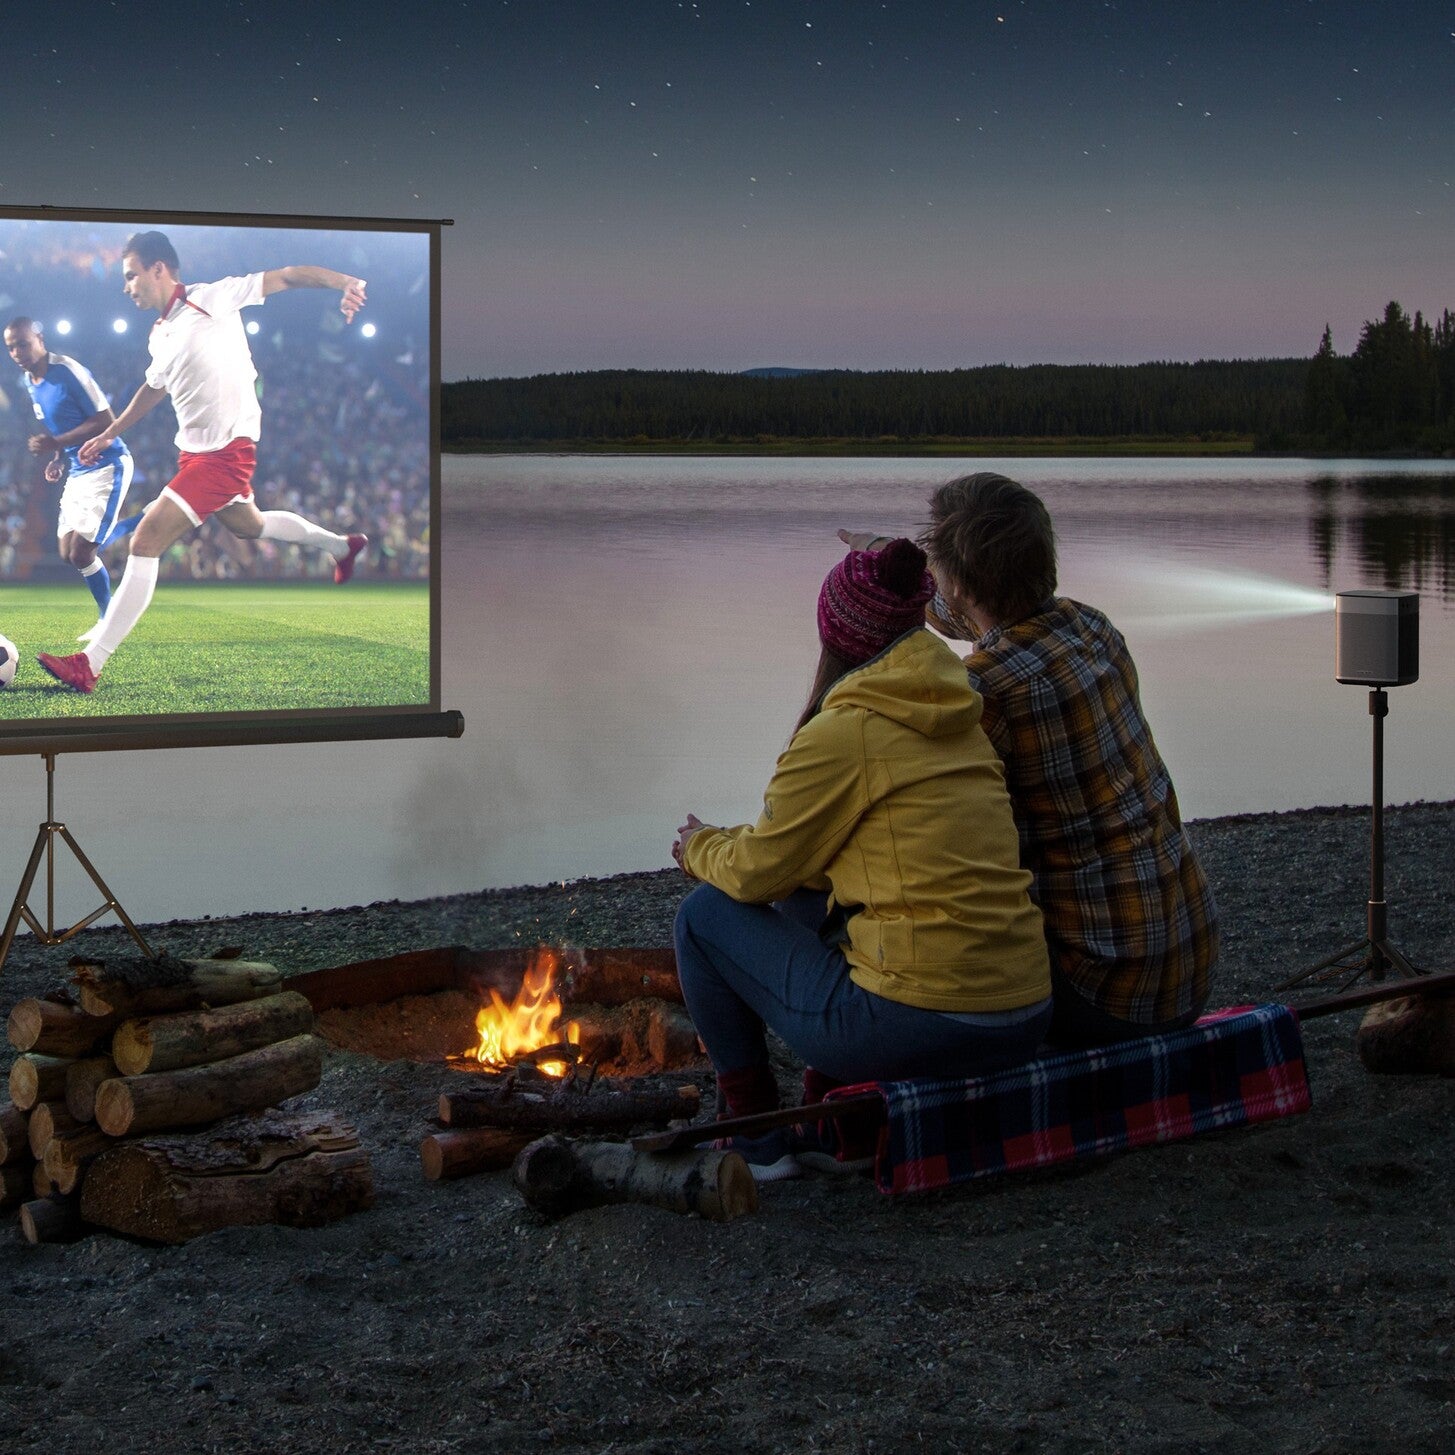 A Remarkable FIFA Viewing Experience With Smart Projectors